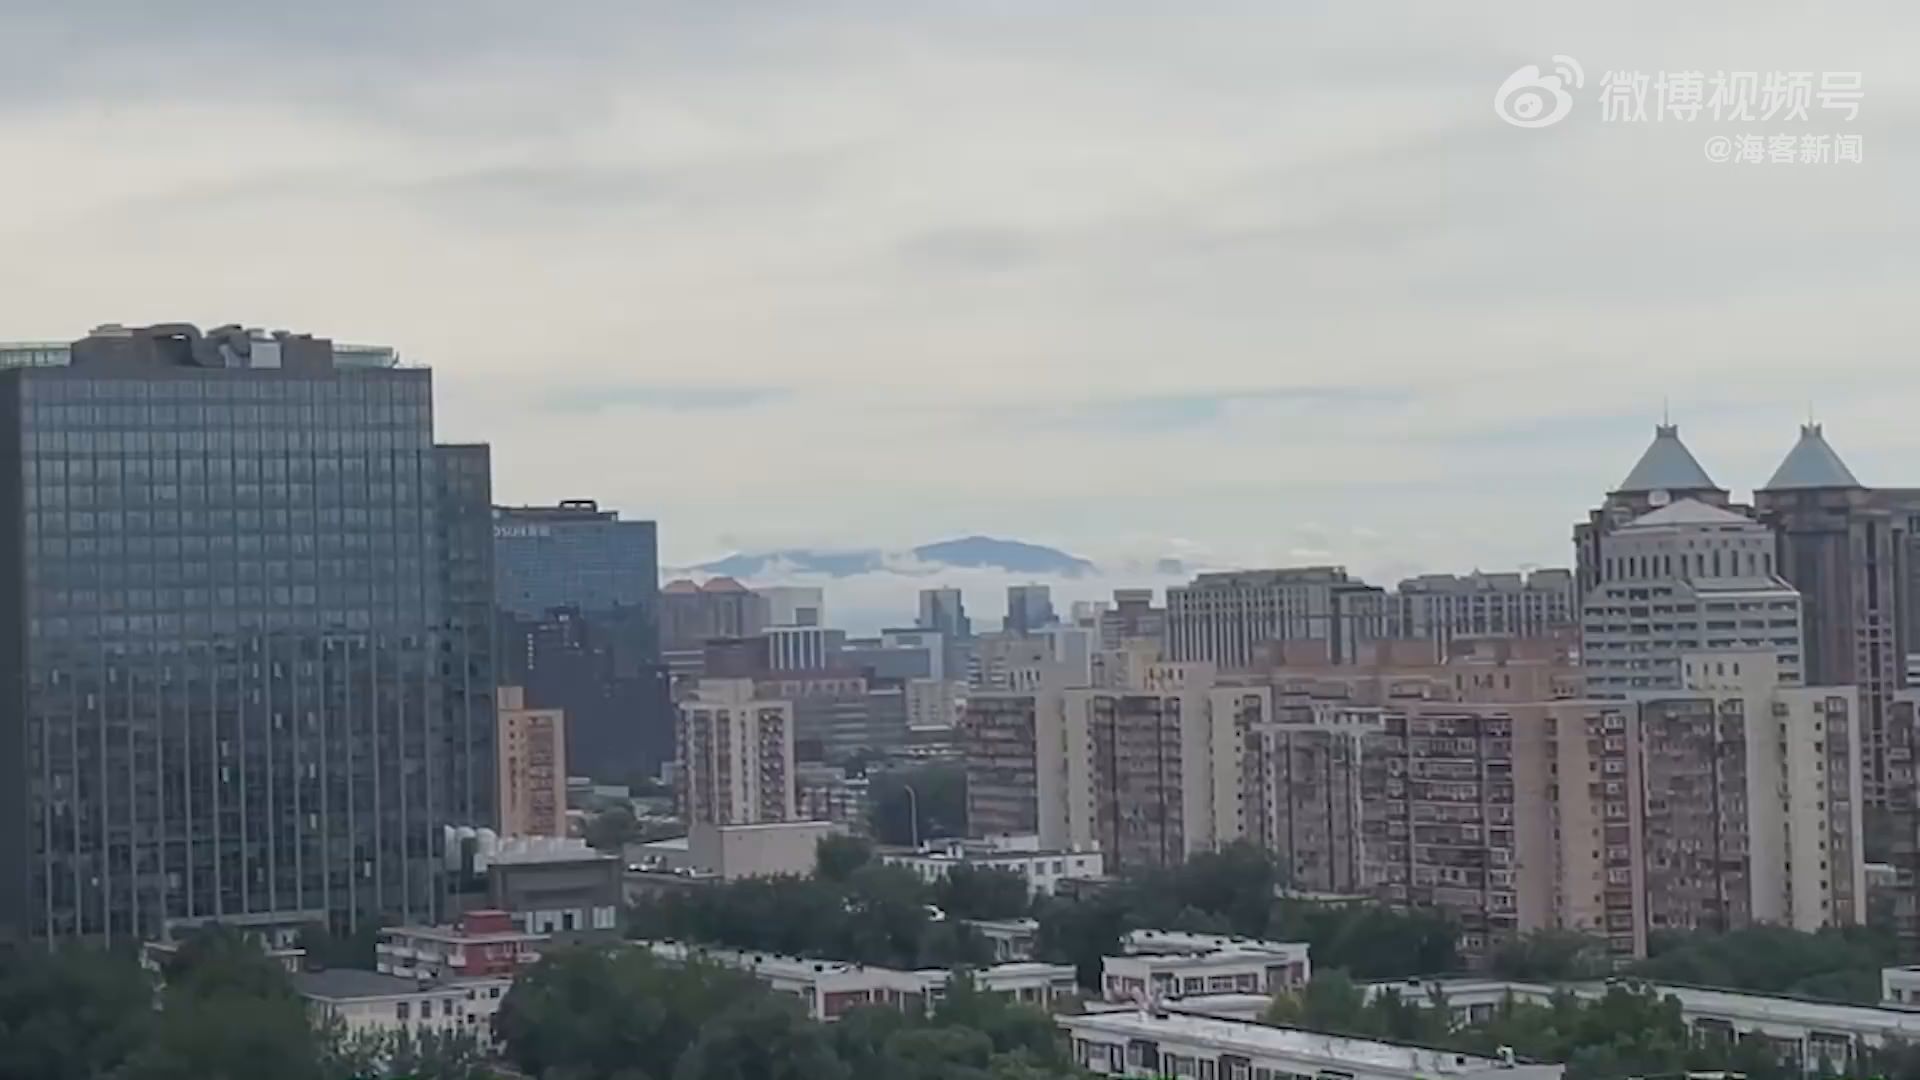  On the first day of college entrance examination, a magnificent sea of clouds appears after rain in Beijing